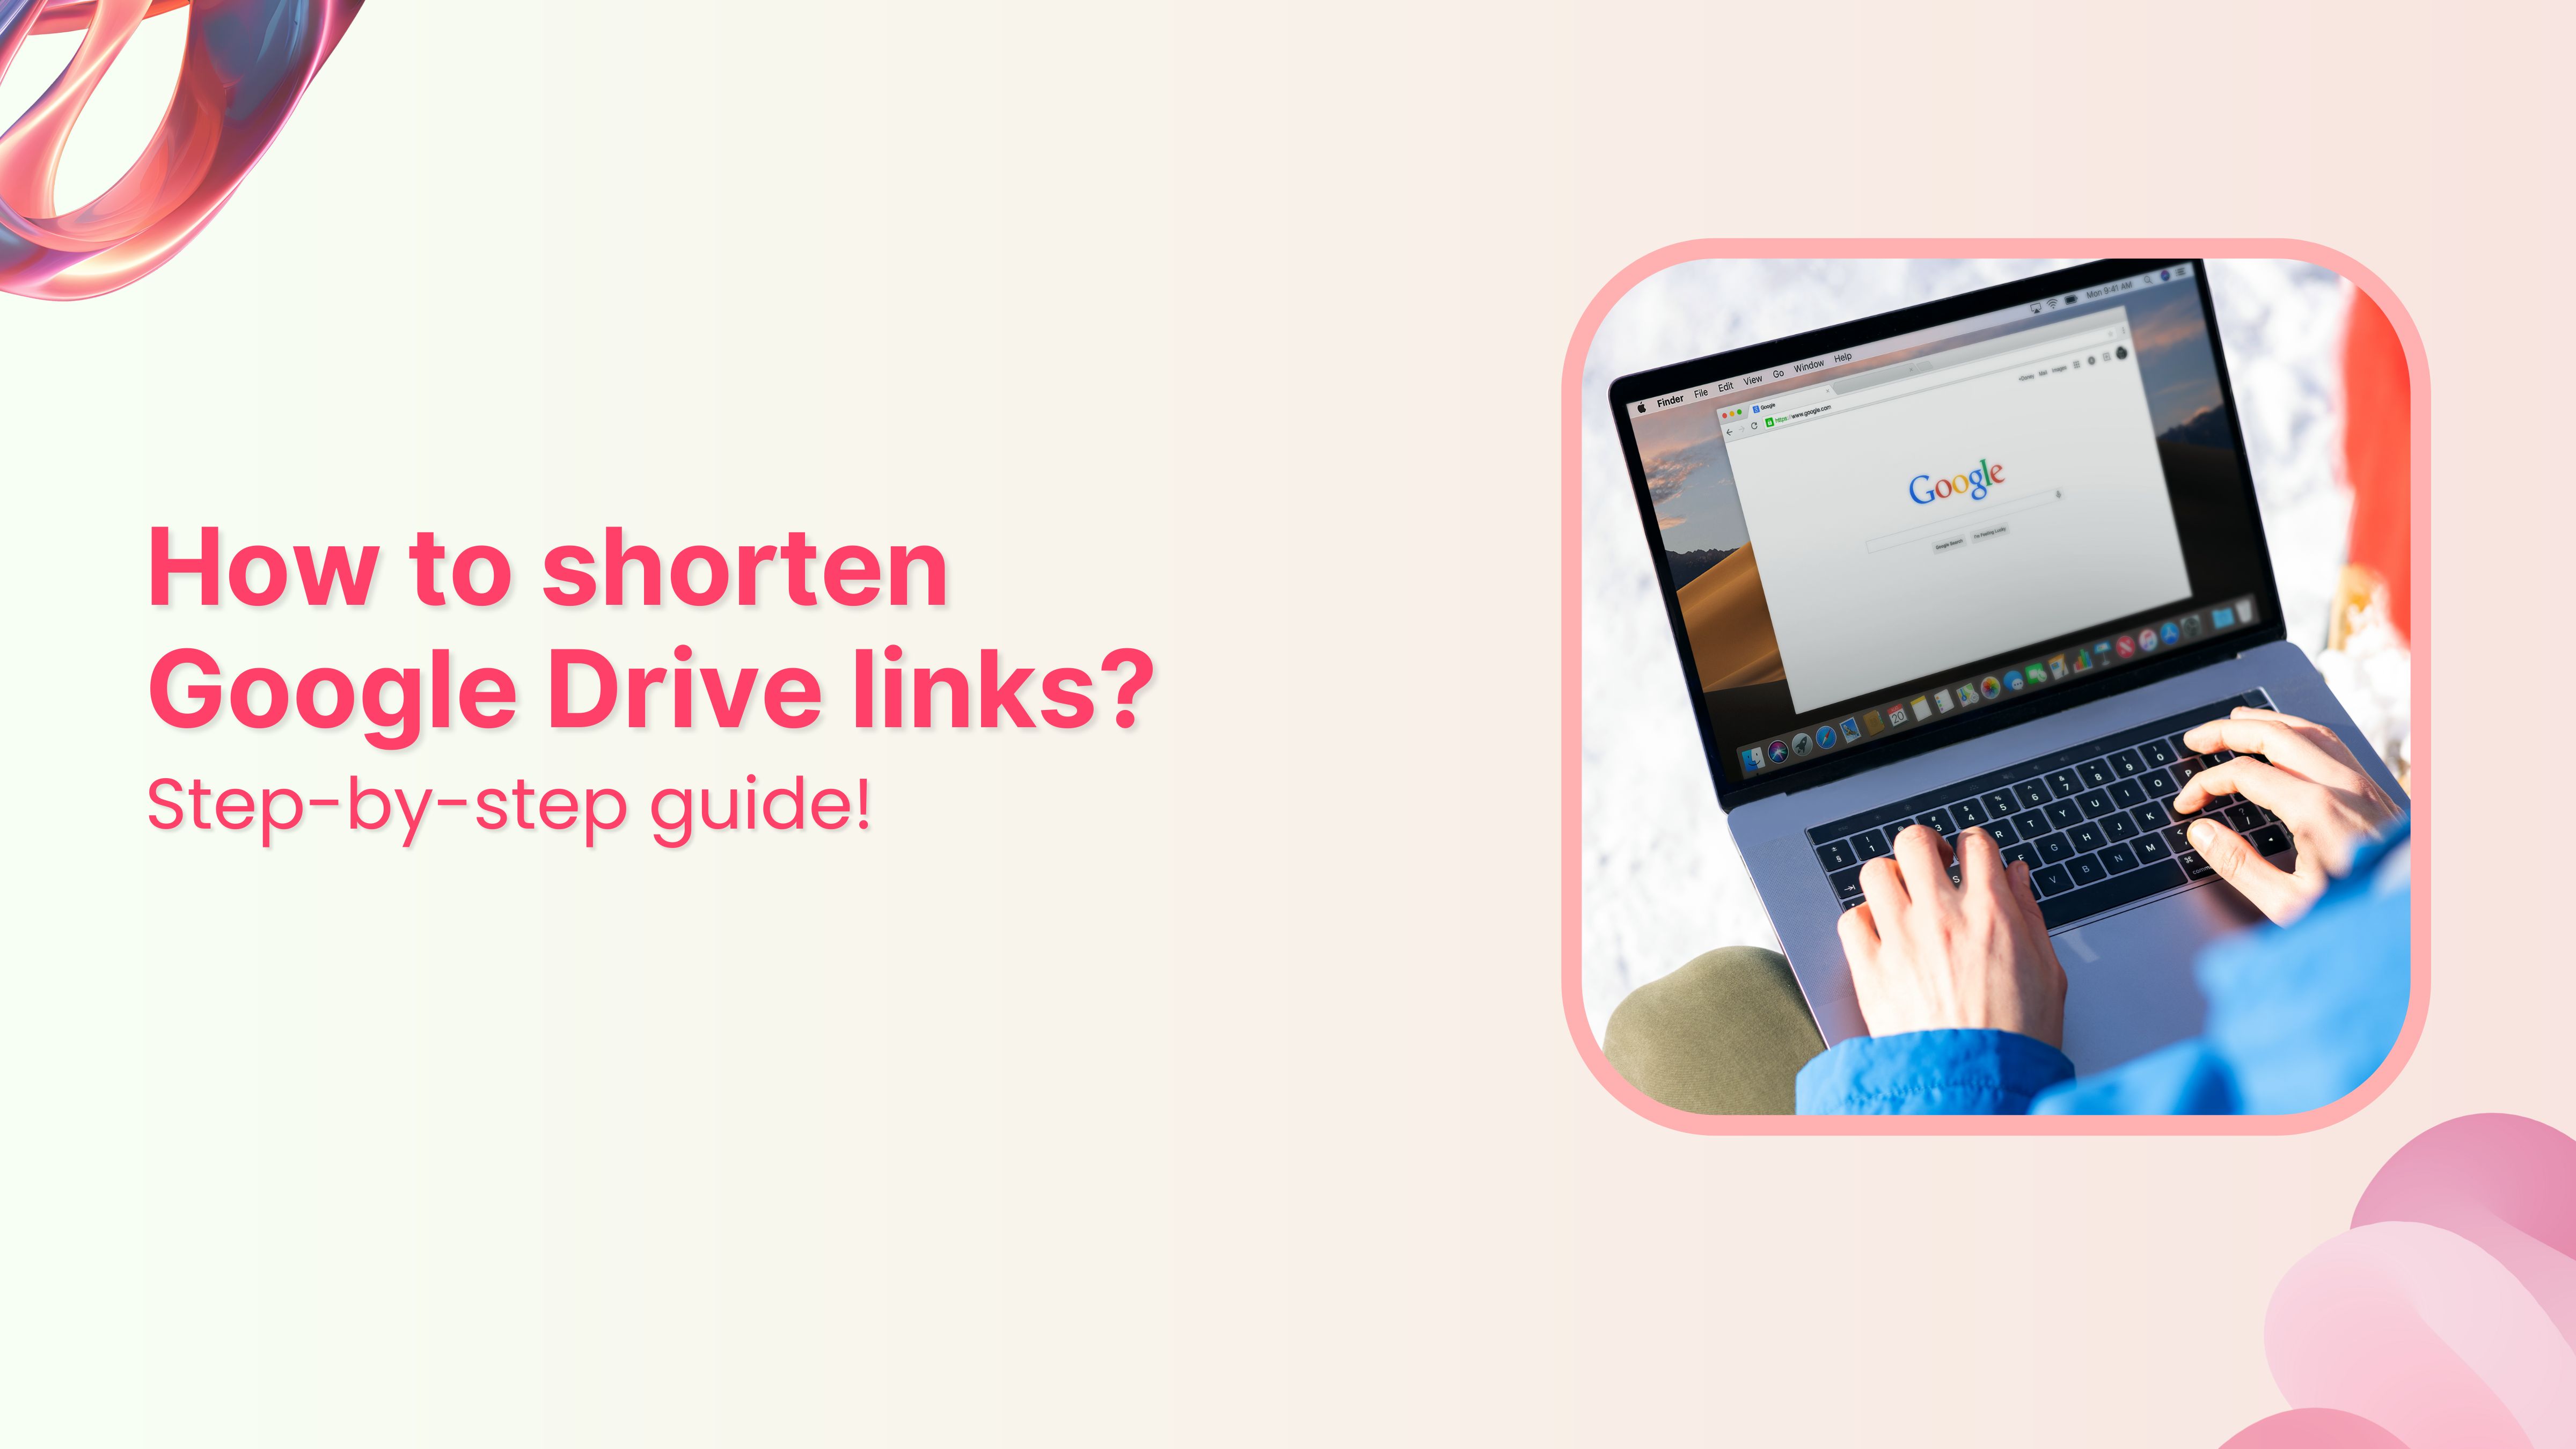 How to shorten Google Drive link: Step-by-step guide